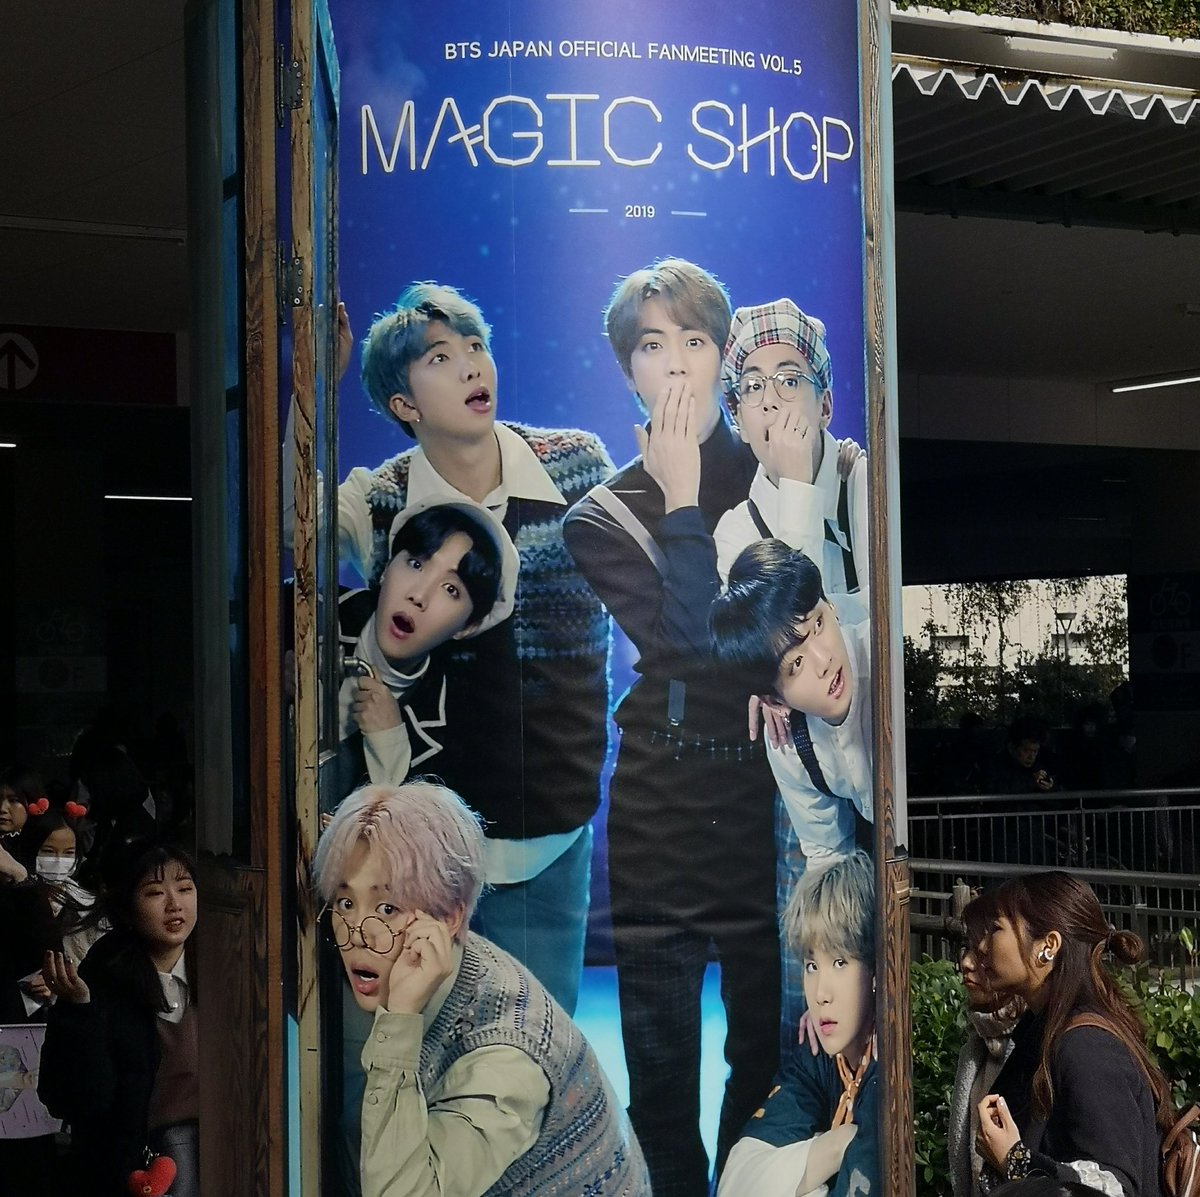 Osaka D2 ments in a neat thread. The video quality is a bit fuzzy but you can listen to them nonetheless ☺️💜
#btsペンミ大阪 #MAGICSHOPinOsaka #MagicShopJapan